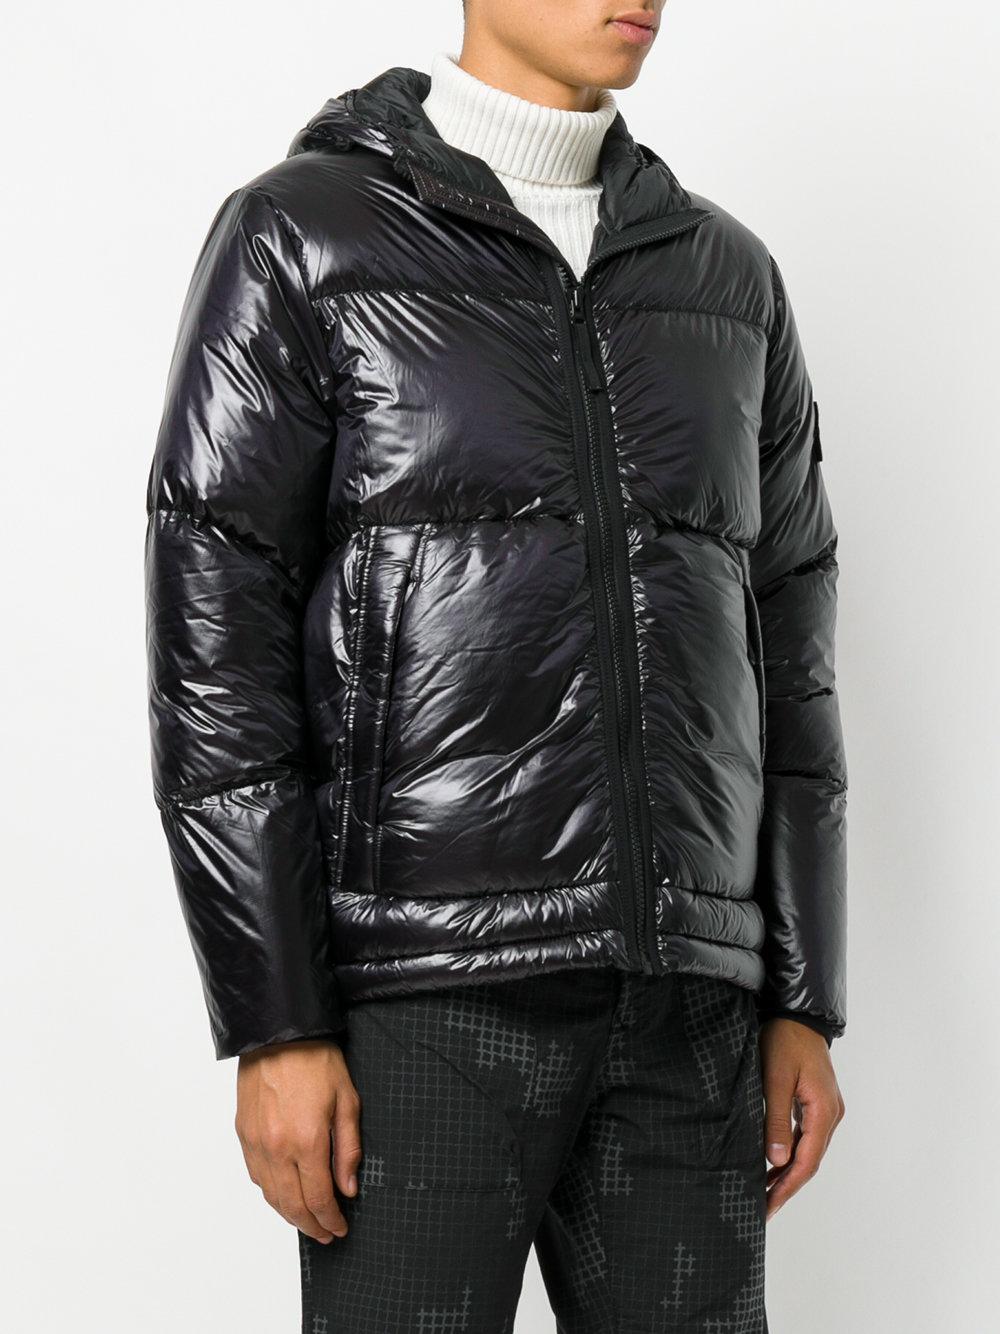 Stone Island Synthetic Glossy Puffer Jacket in Black for Men - Lyst